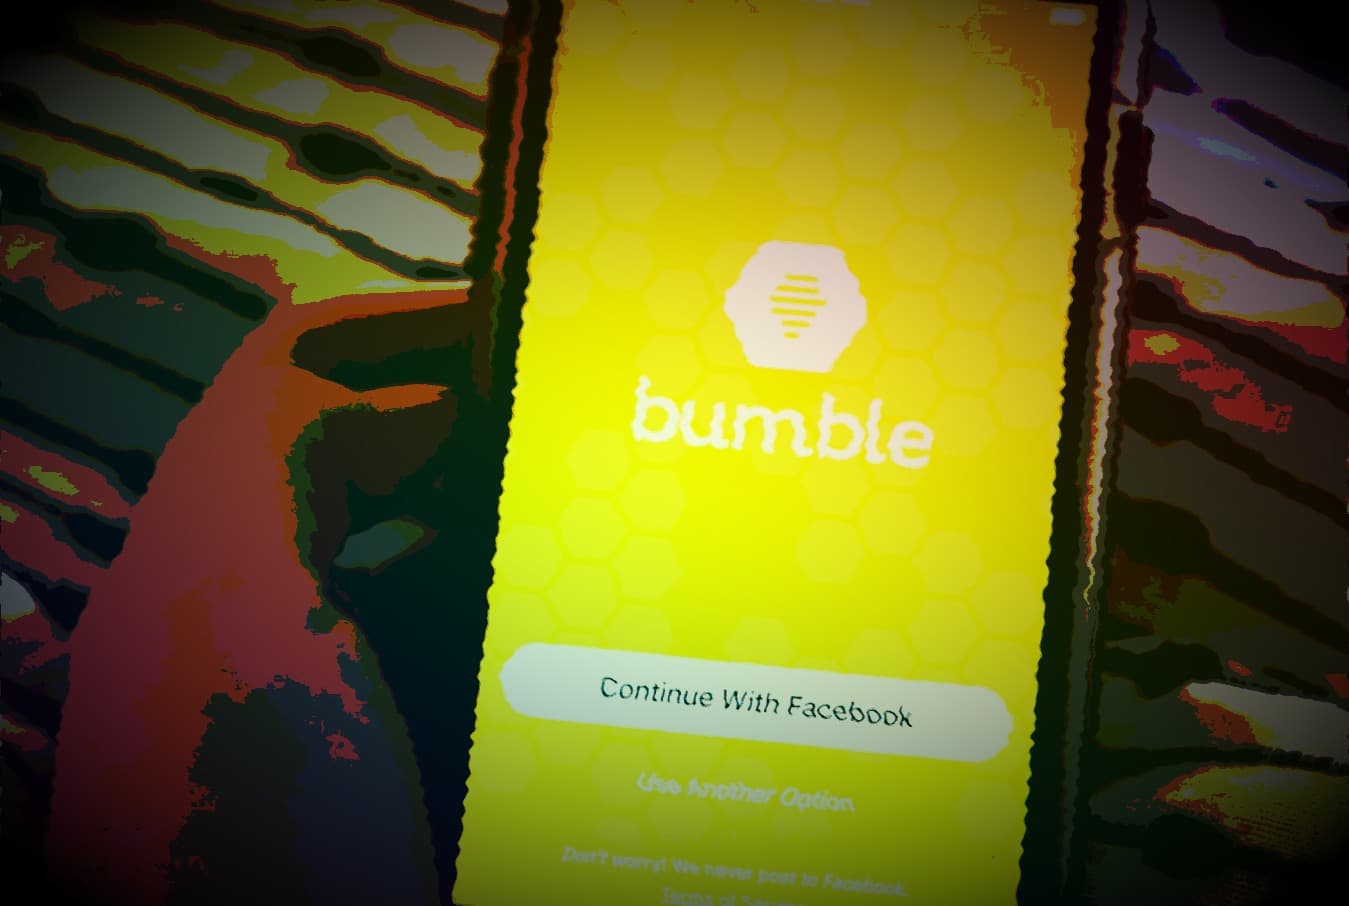 Dating app Bumble leaks photos and location data of 100 million users